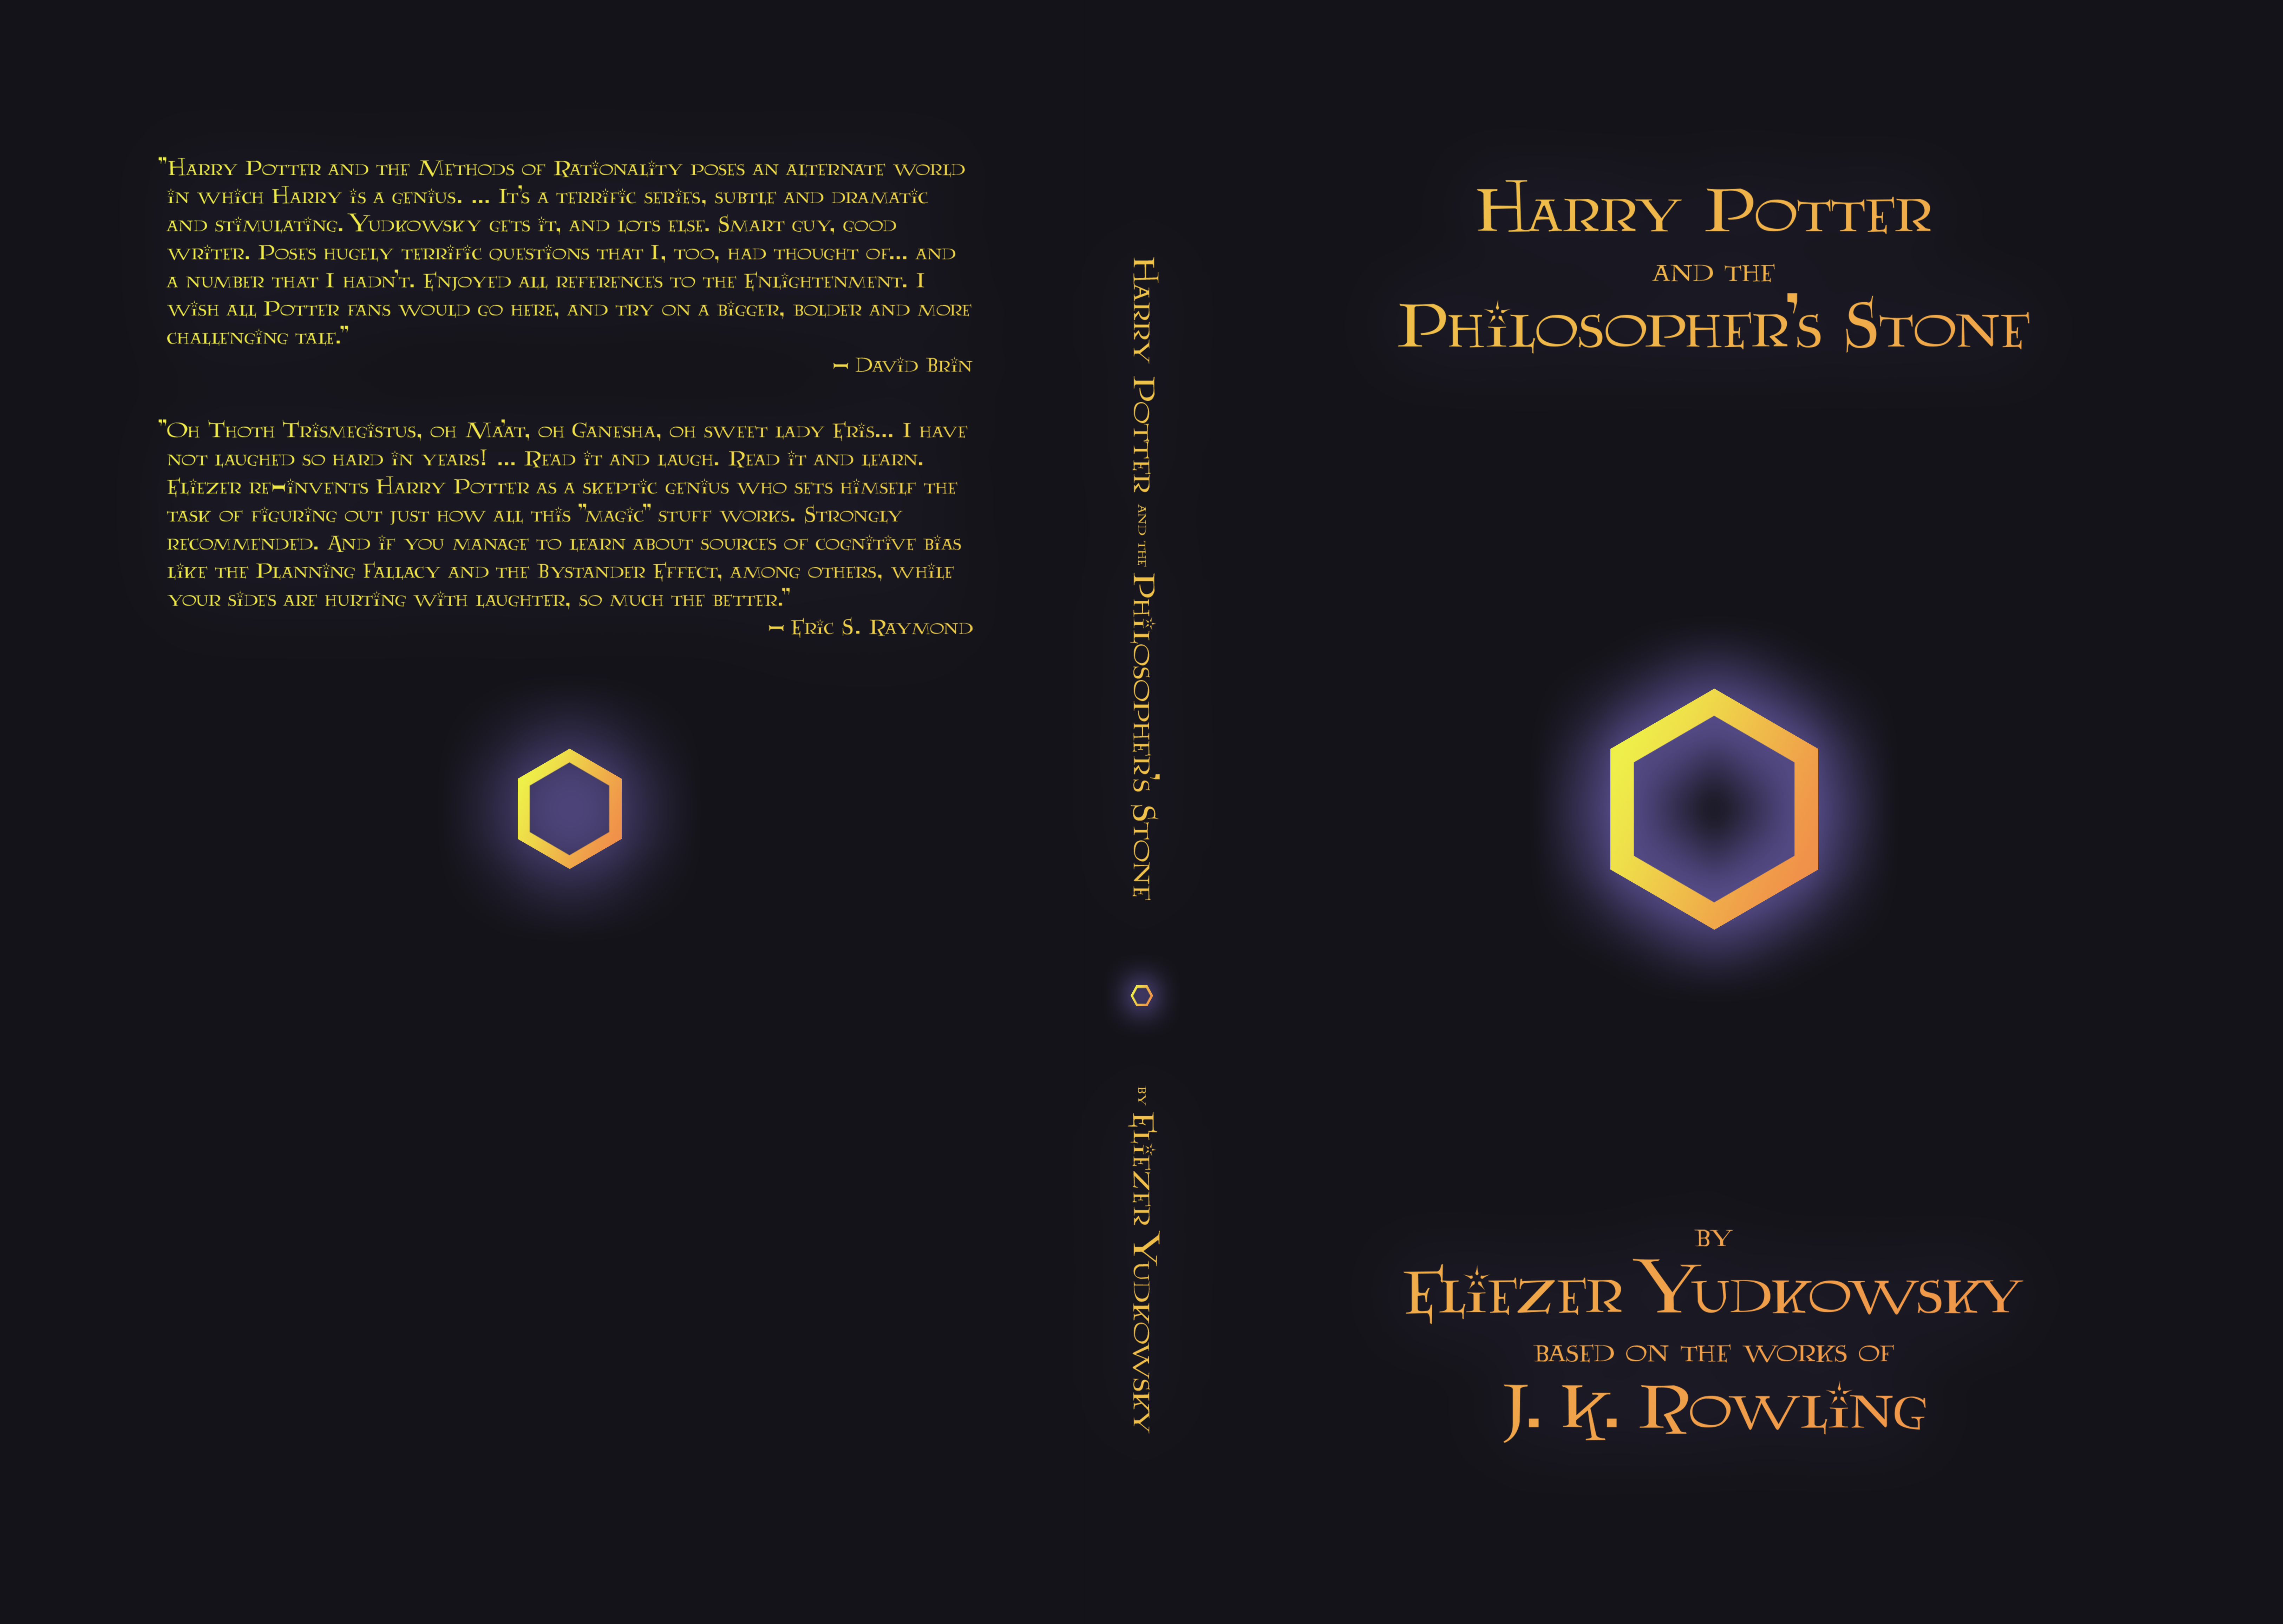 Volume 6: Harry Potter and the Philosopher's Stone